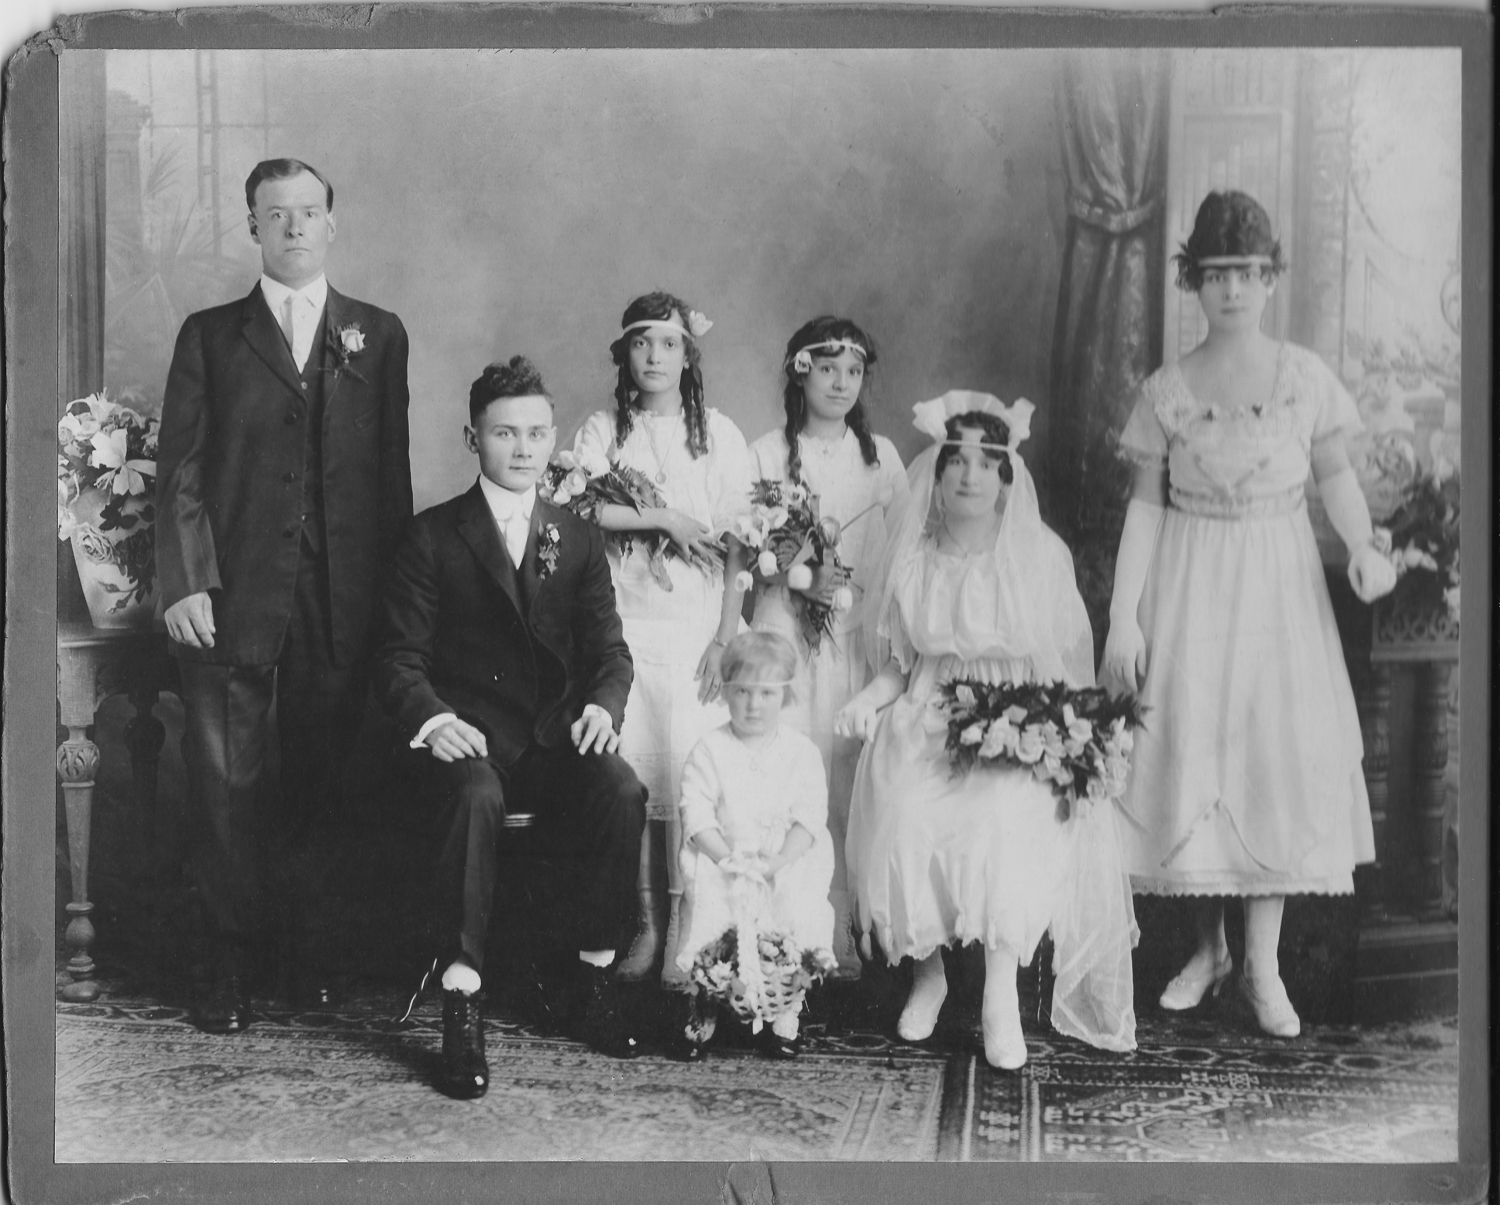 Mom and Pa’s wedding day, May 1917